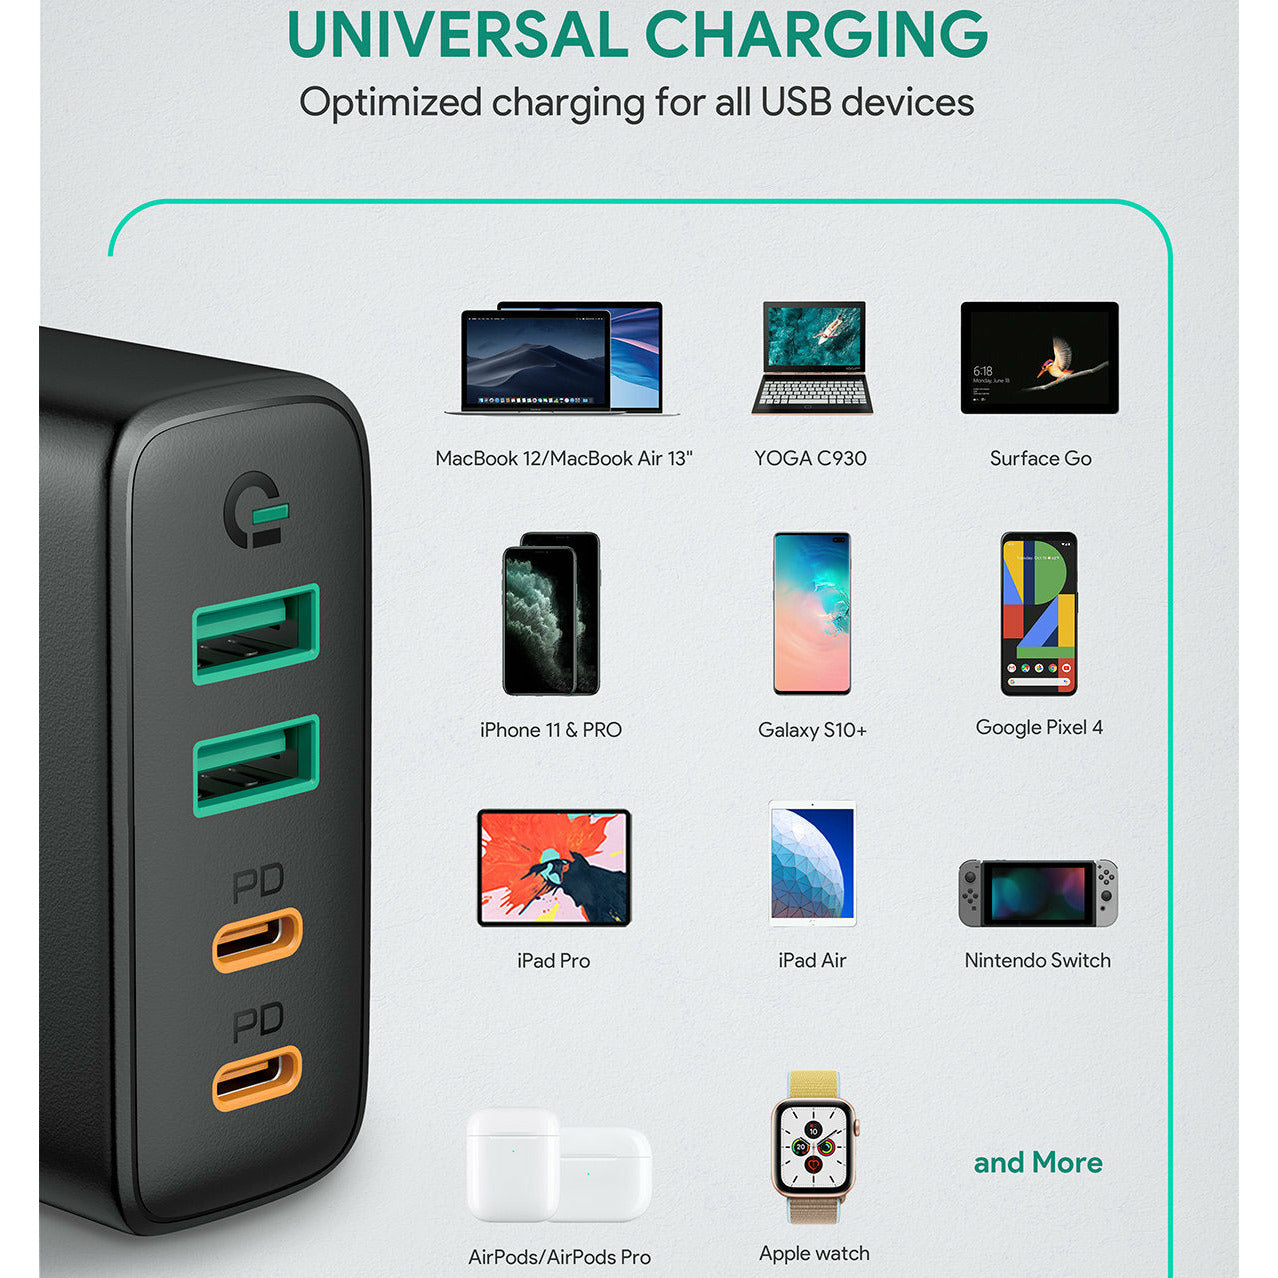 AUKEY PA-D52 Foldable USB C Charger 48W 4 Ports with Power Delivery